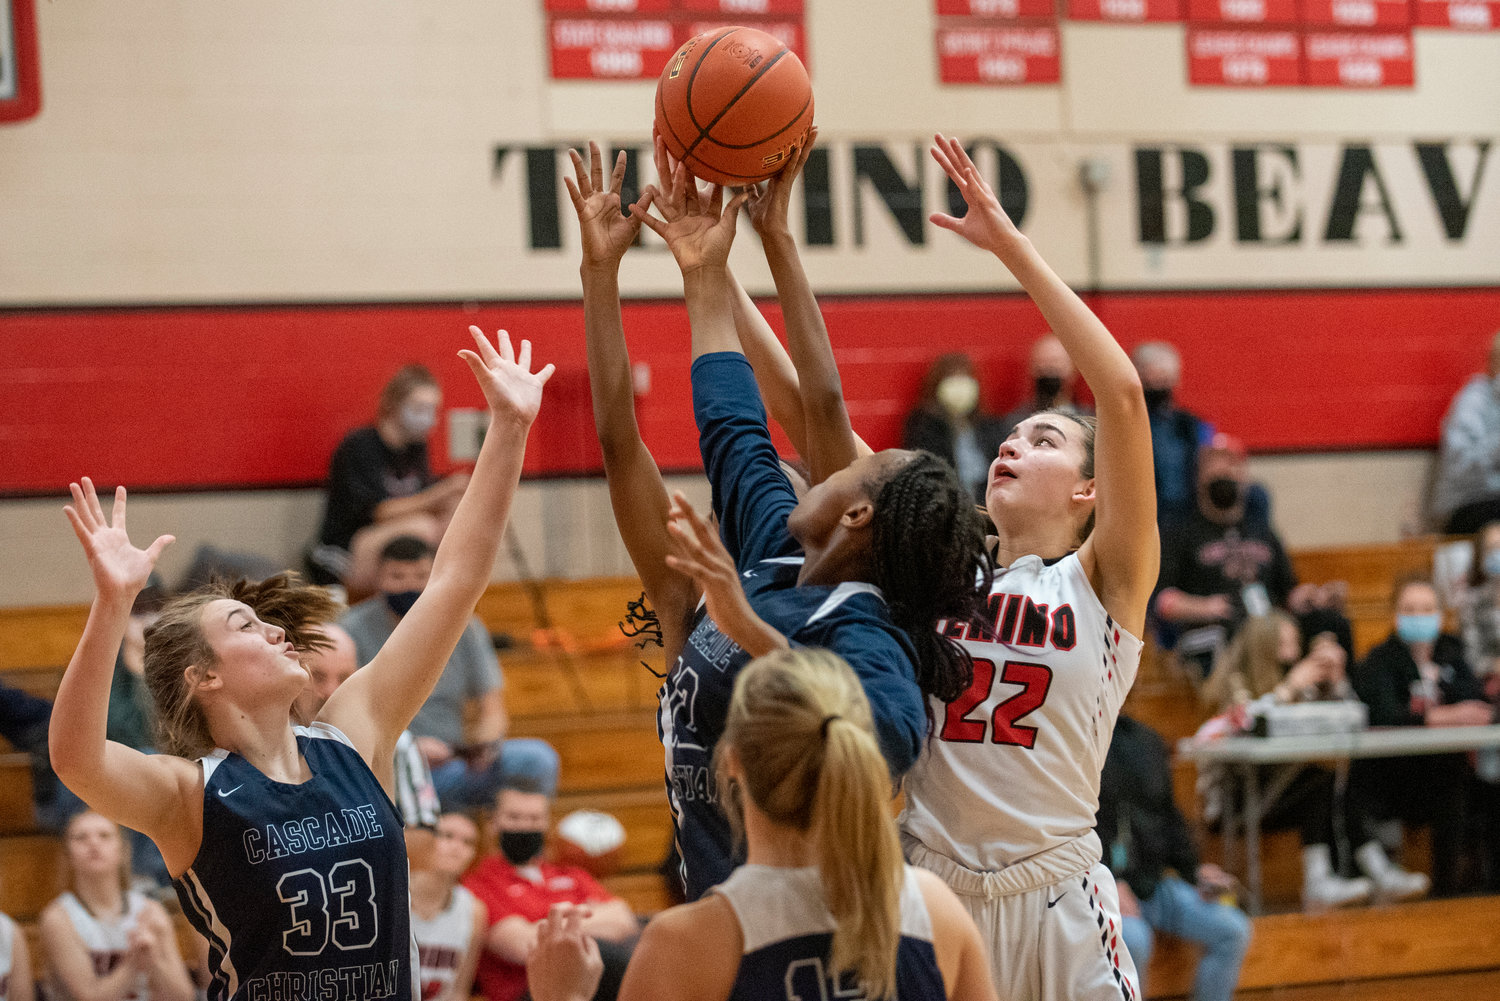 Tenino's Ashley Schow (22) battles for a rebound with Cascade Christian players on Dec. 20.